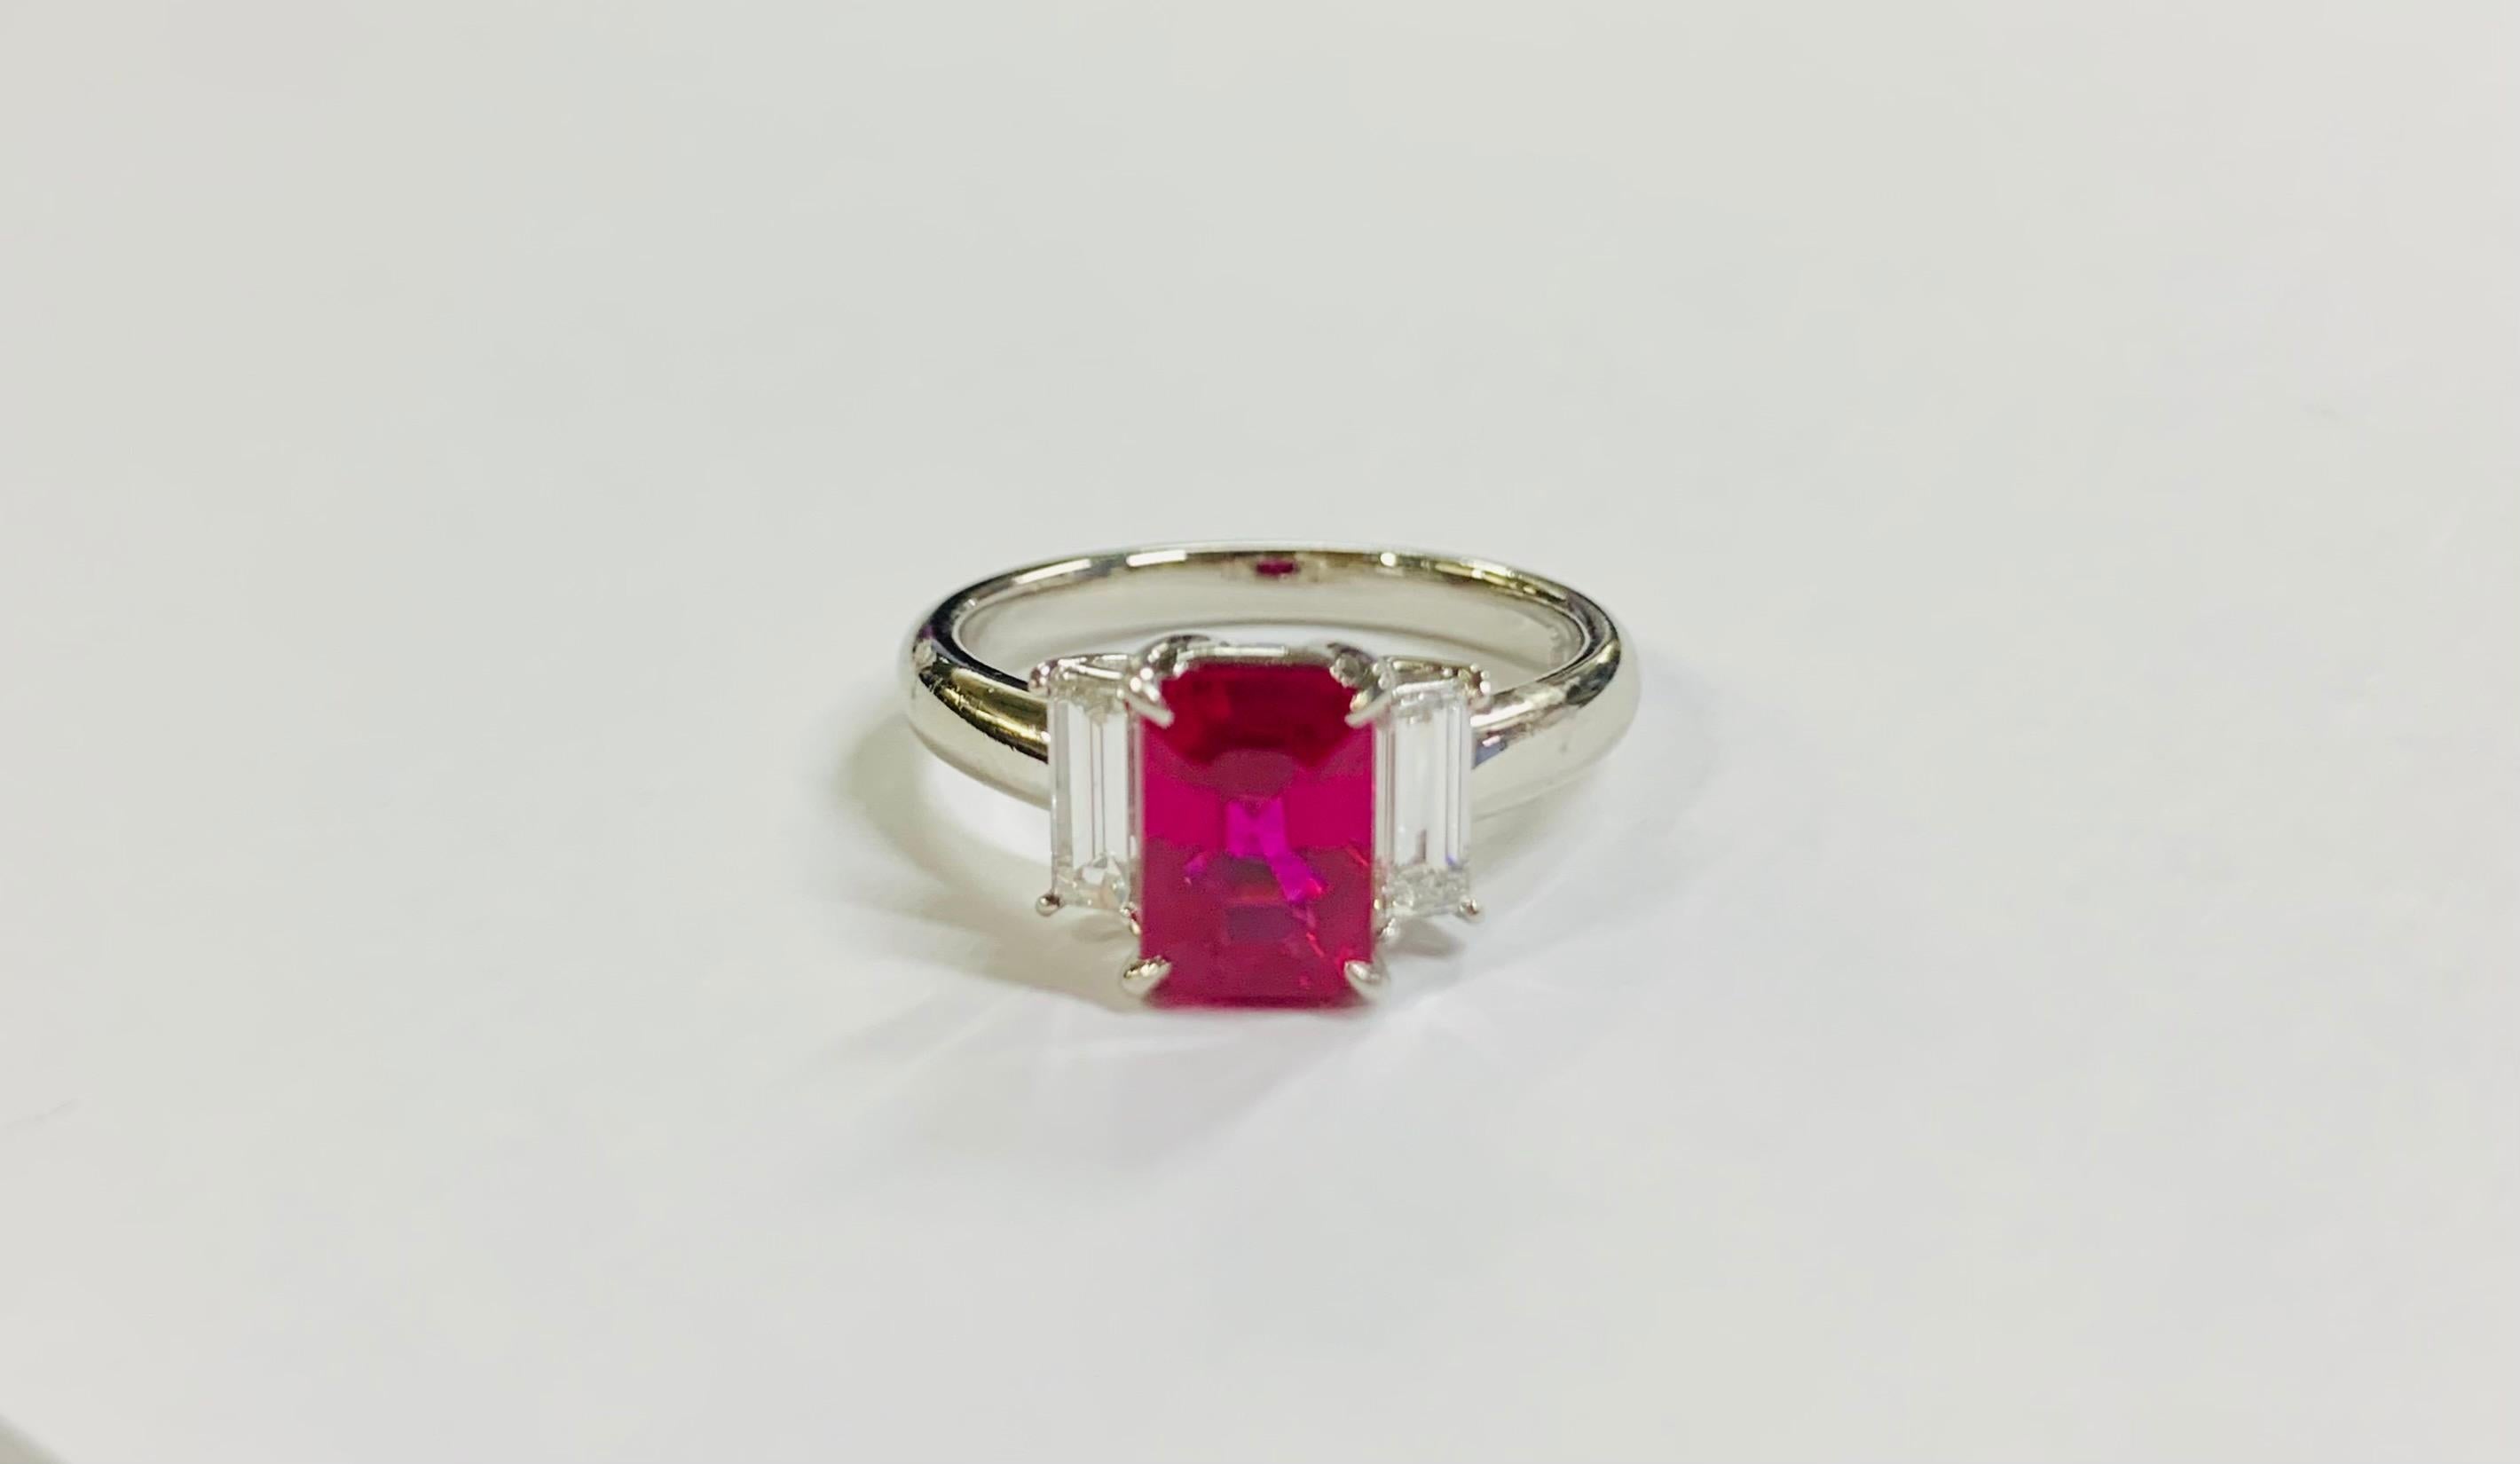 Natural Burmese Ruby and Diamond Ring with GIA Certification

Stones: Burma Ruby GIA Certified 
Stone Shape: Step Cut
Stone Carat: 2.11 Carat
Stone: Natural Corundum
Side Stones: Diamonds 
Stone Shape: Baguette Diamonds
Stone Color: G
Stone Clarity: